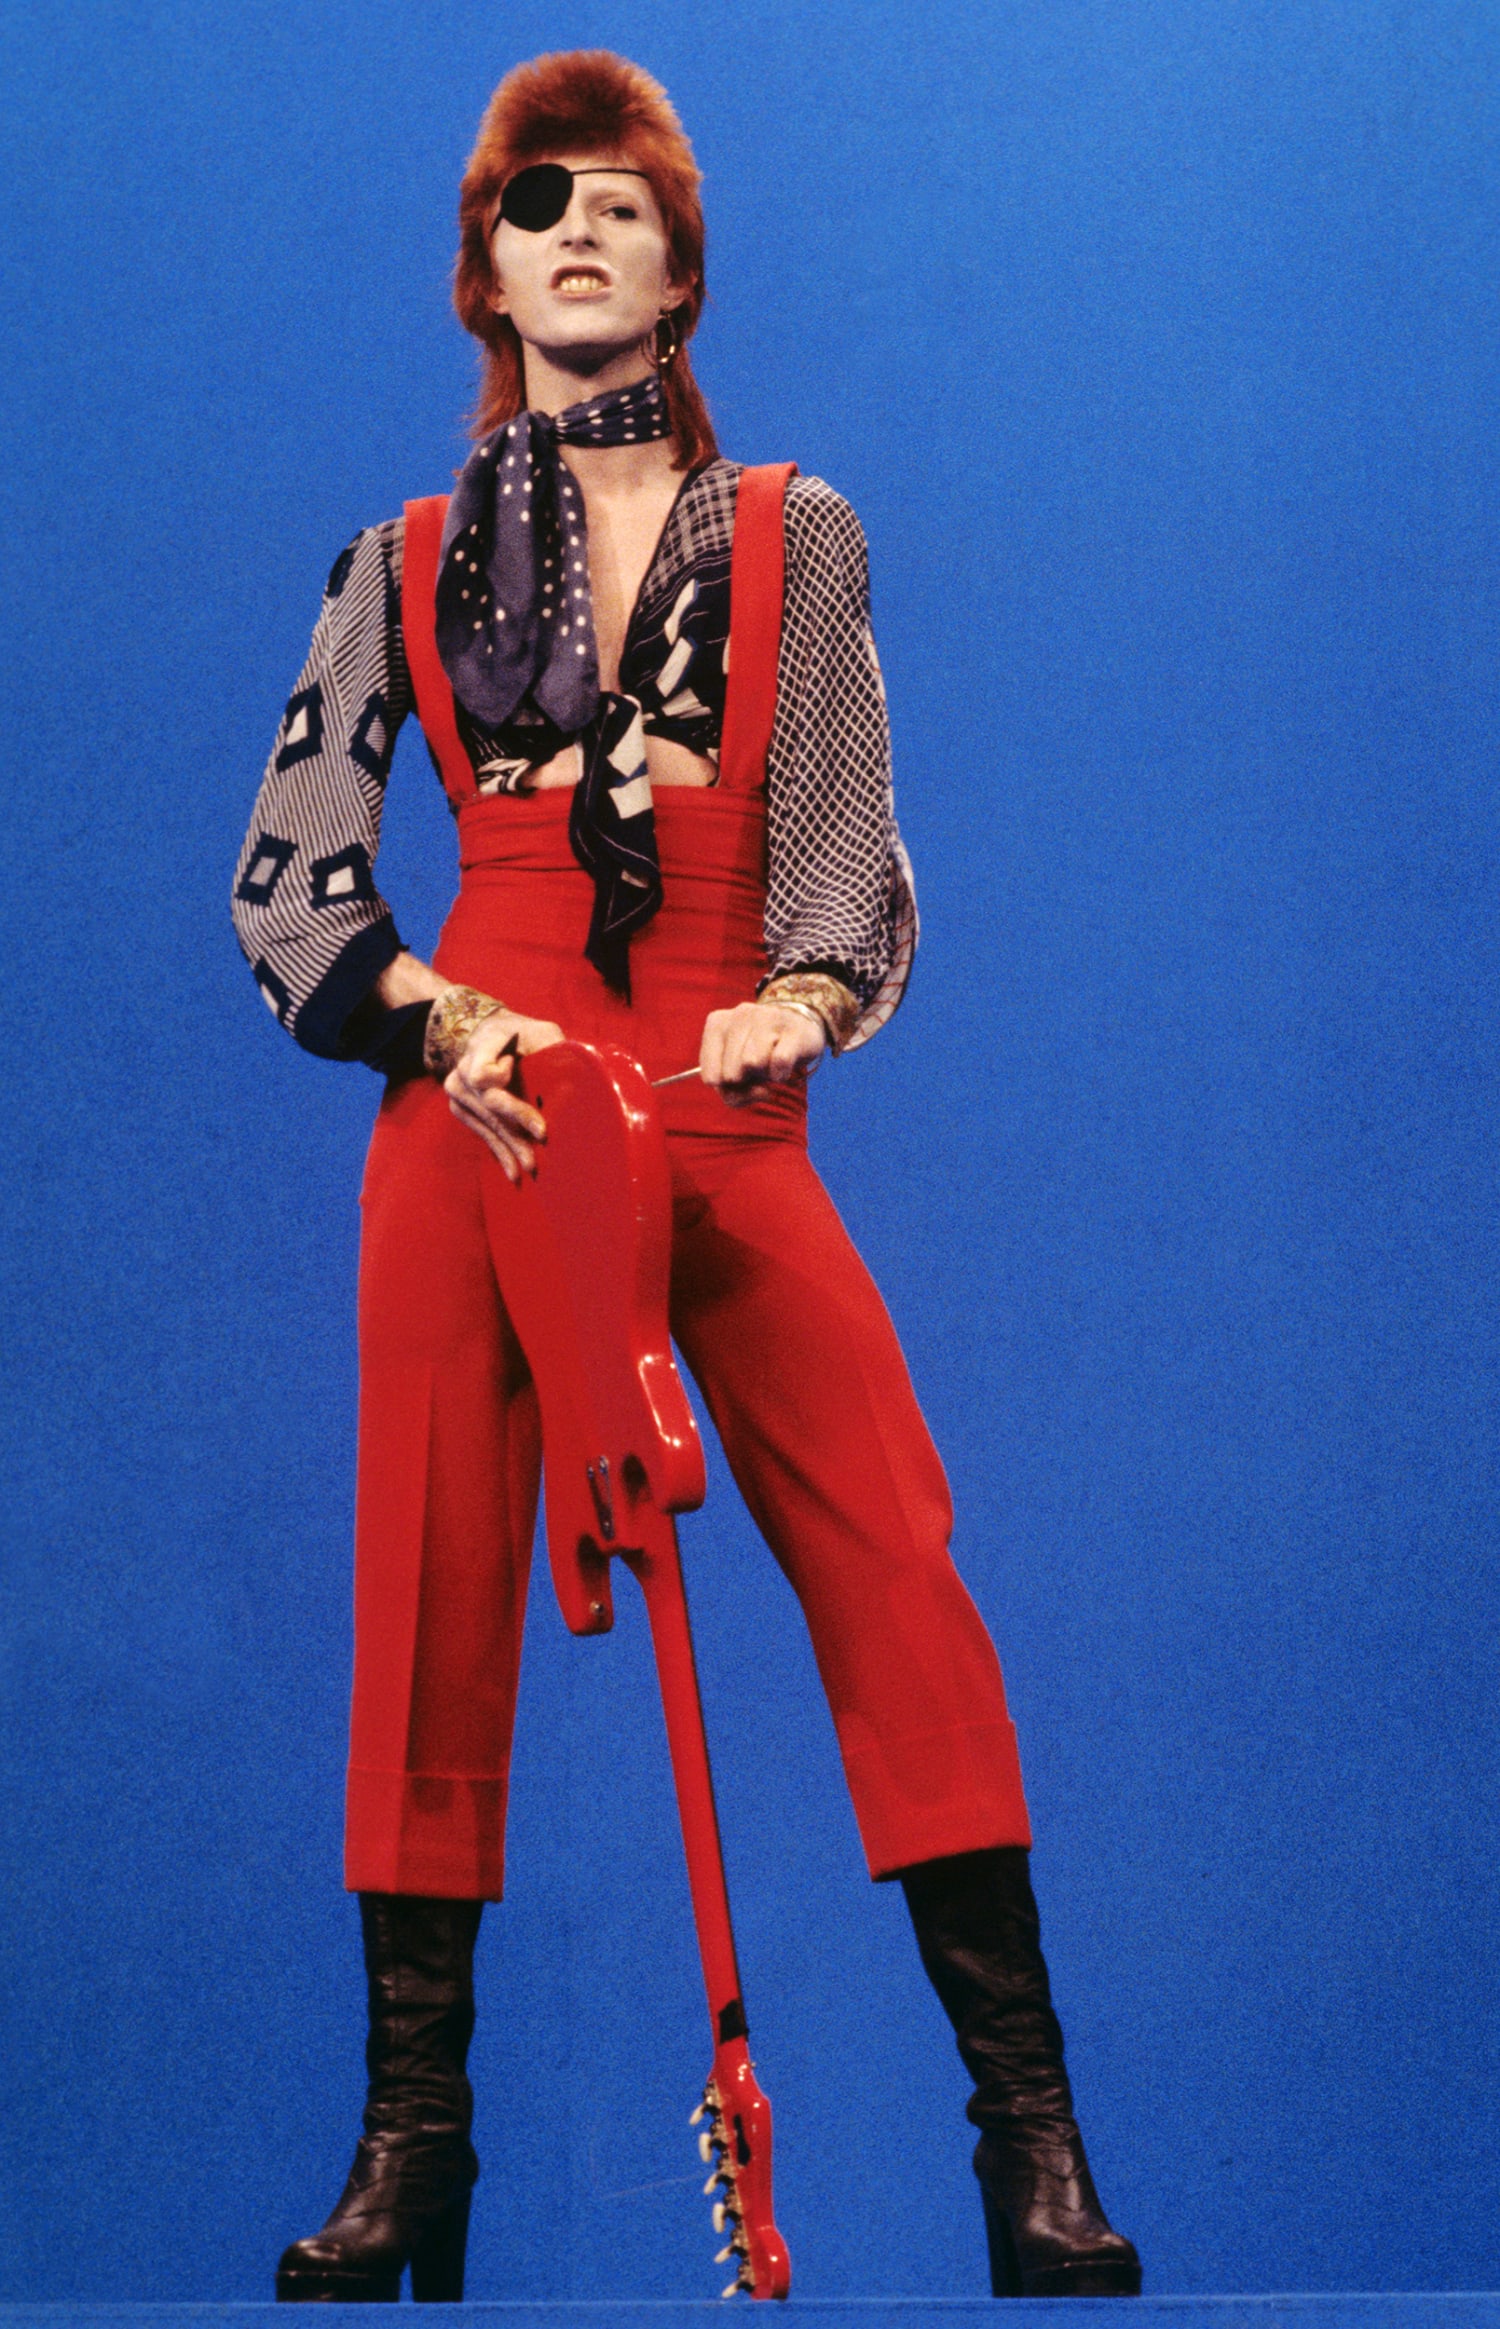 foredrag Udvidelse periskop David Bowie's iconic style